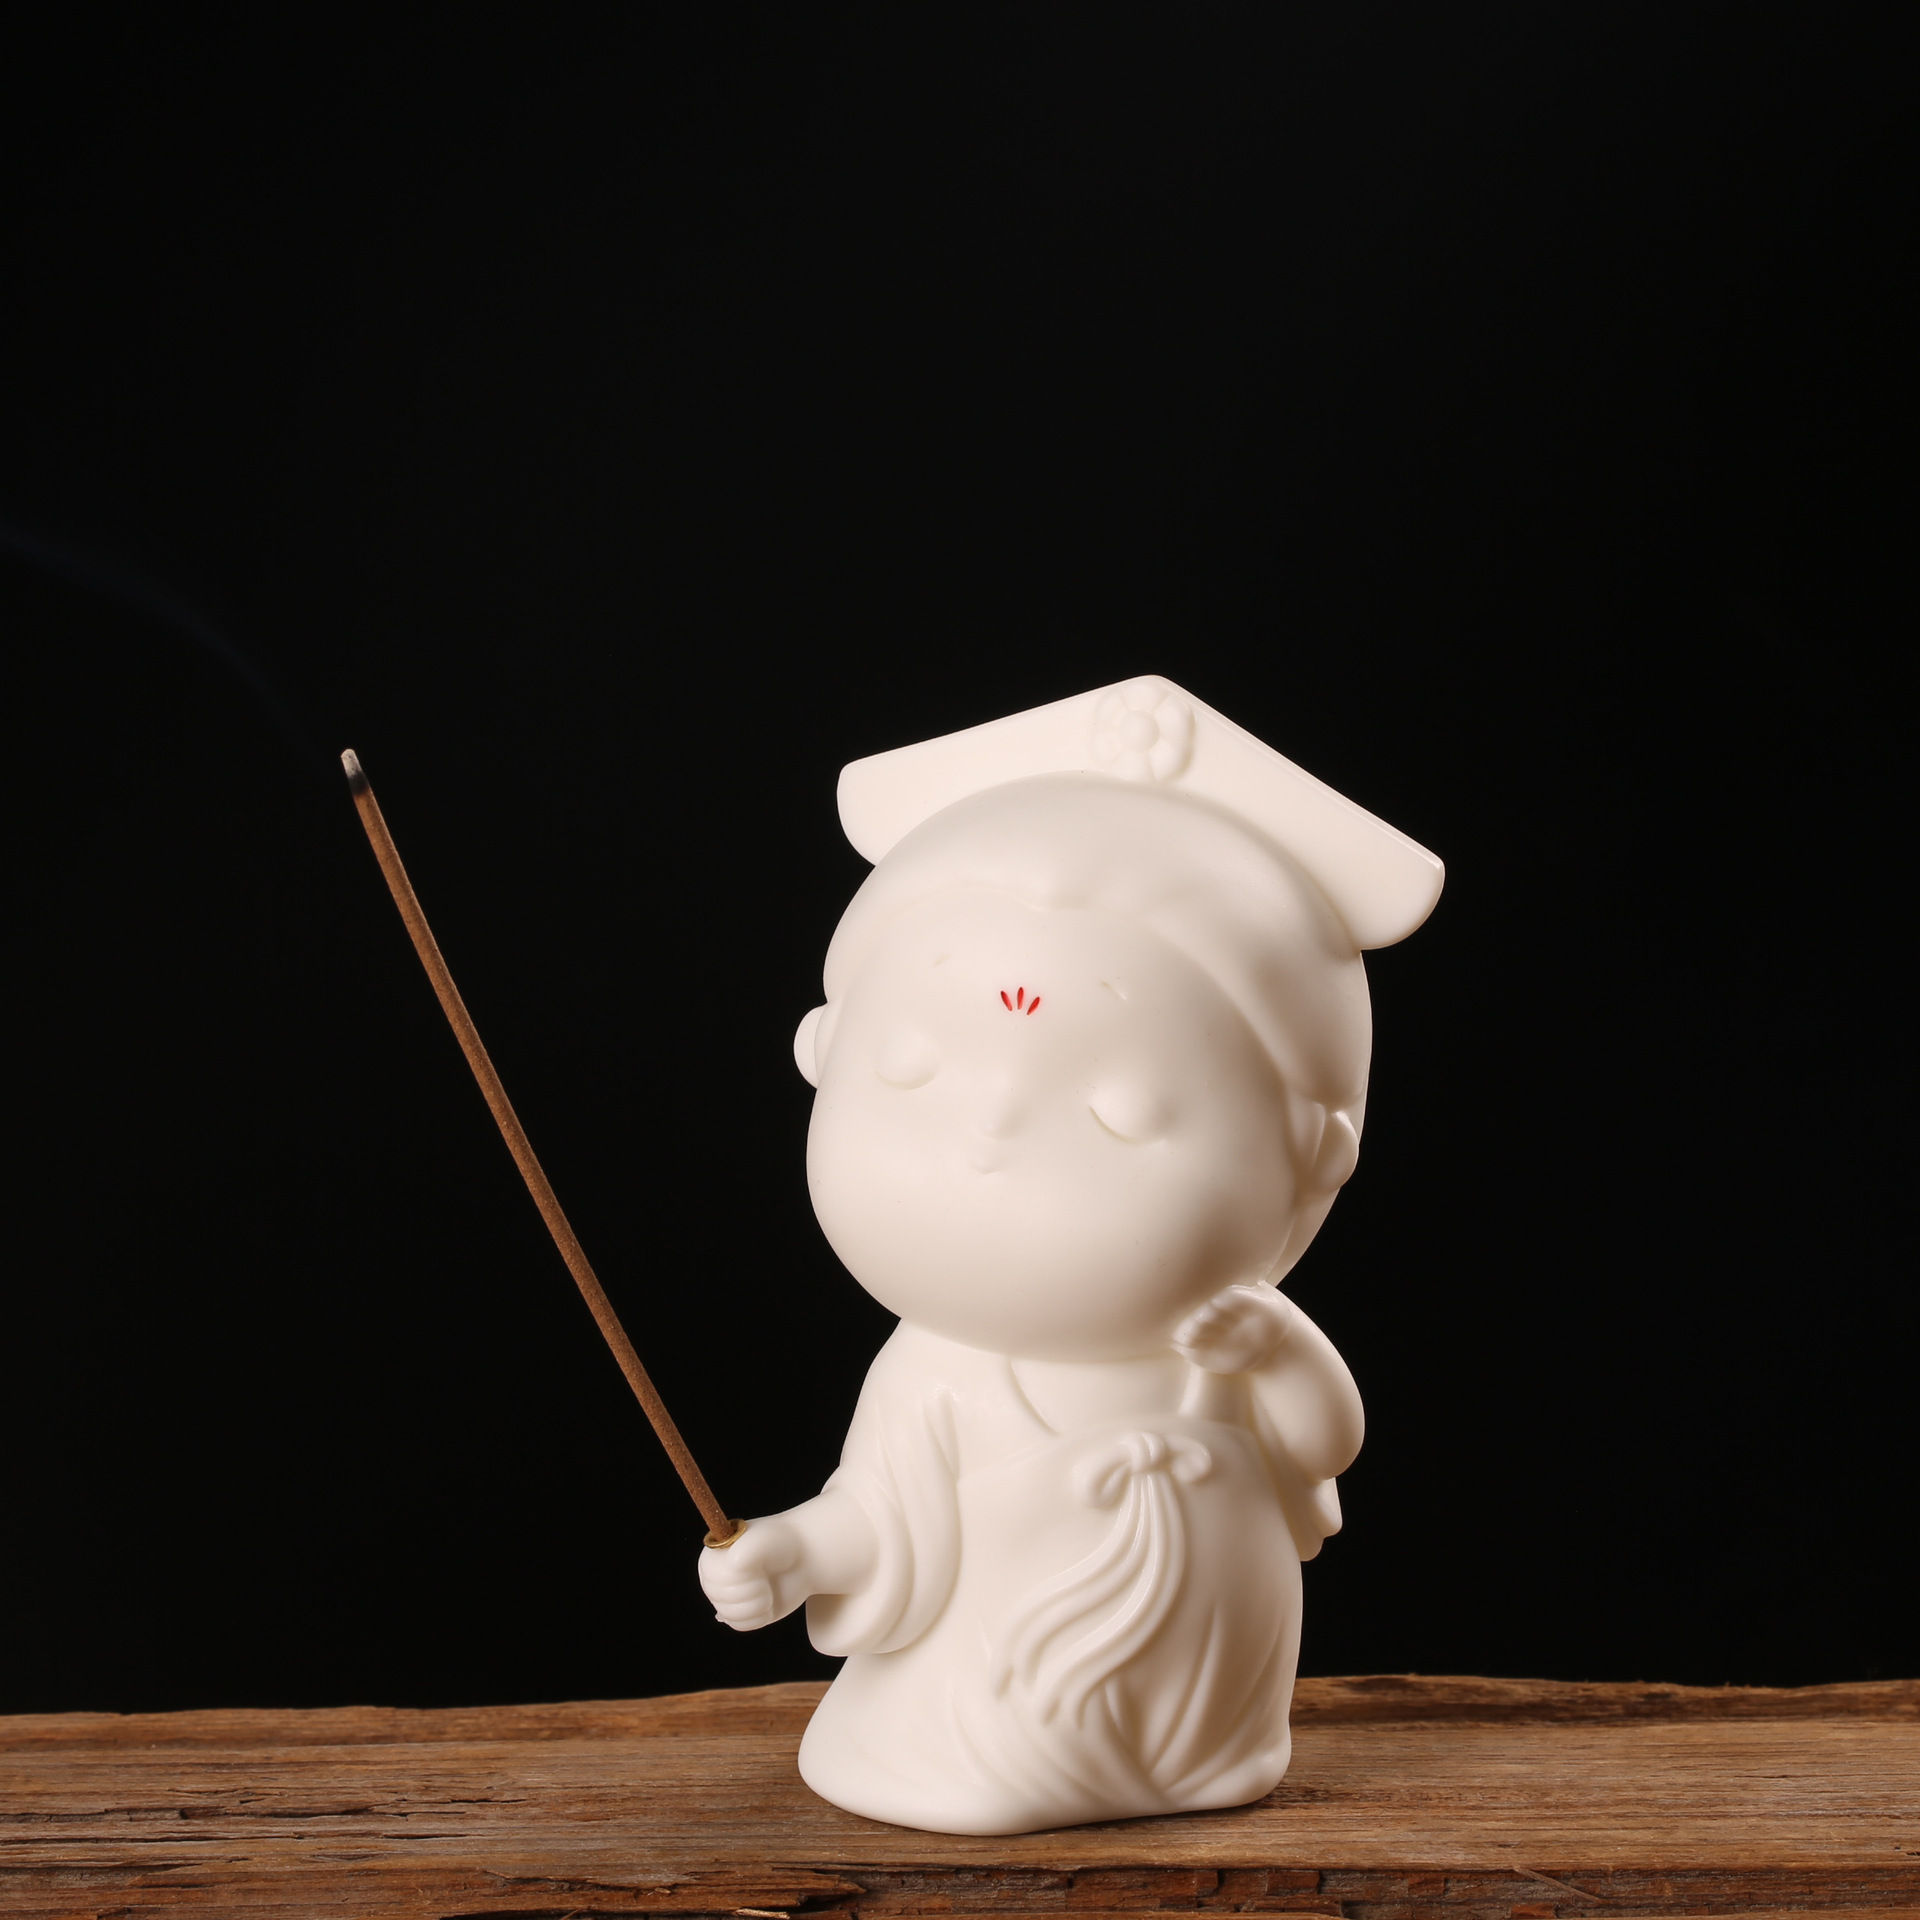 Xiao Gong'e Incense Insert - White Porcelain Touch